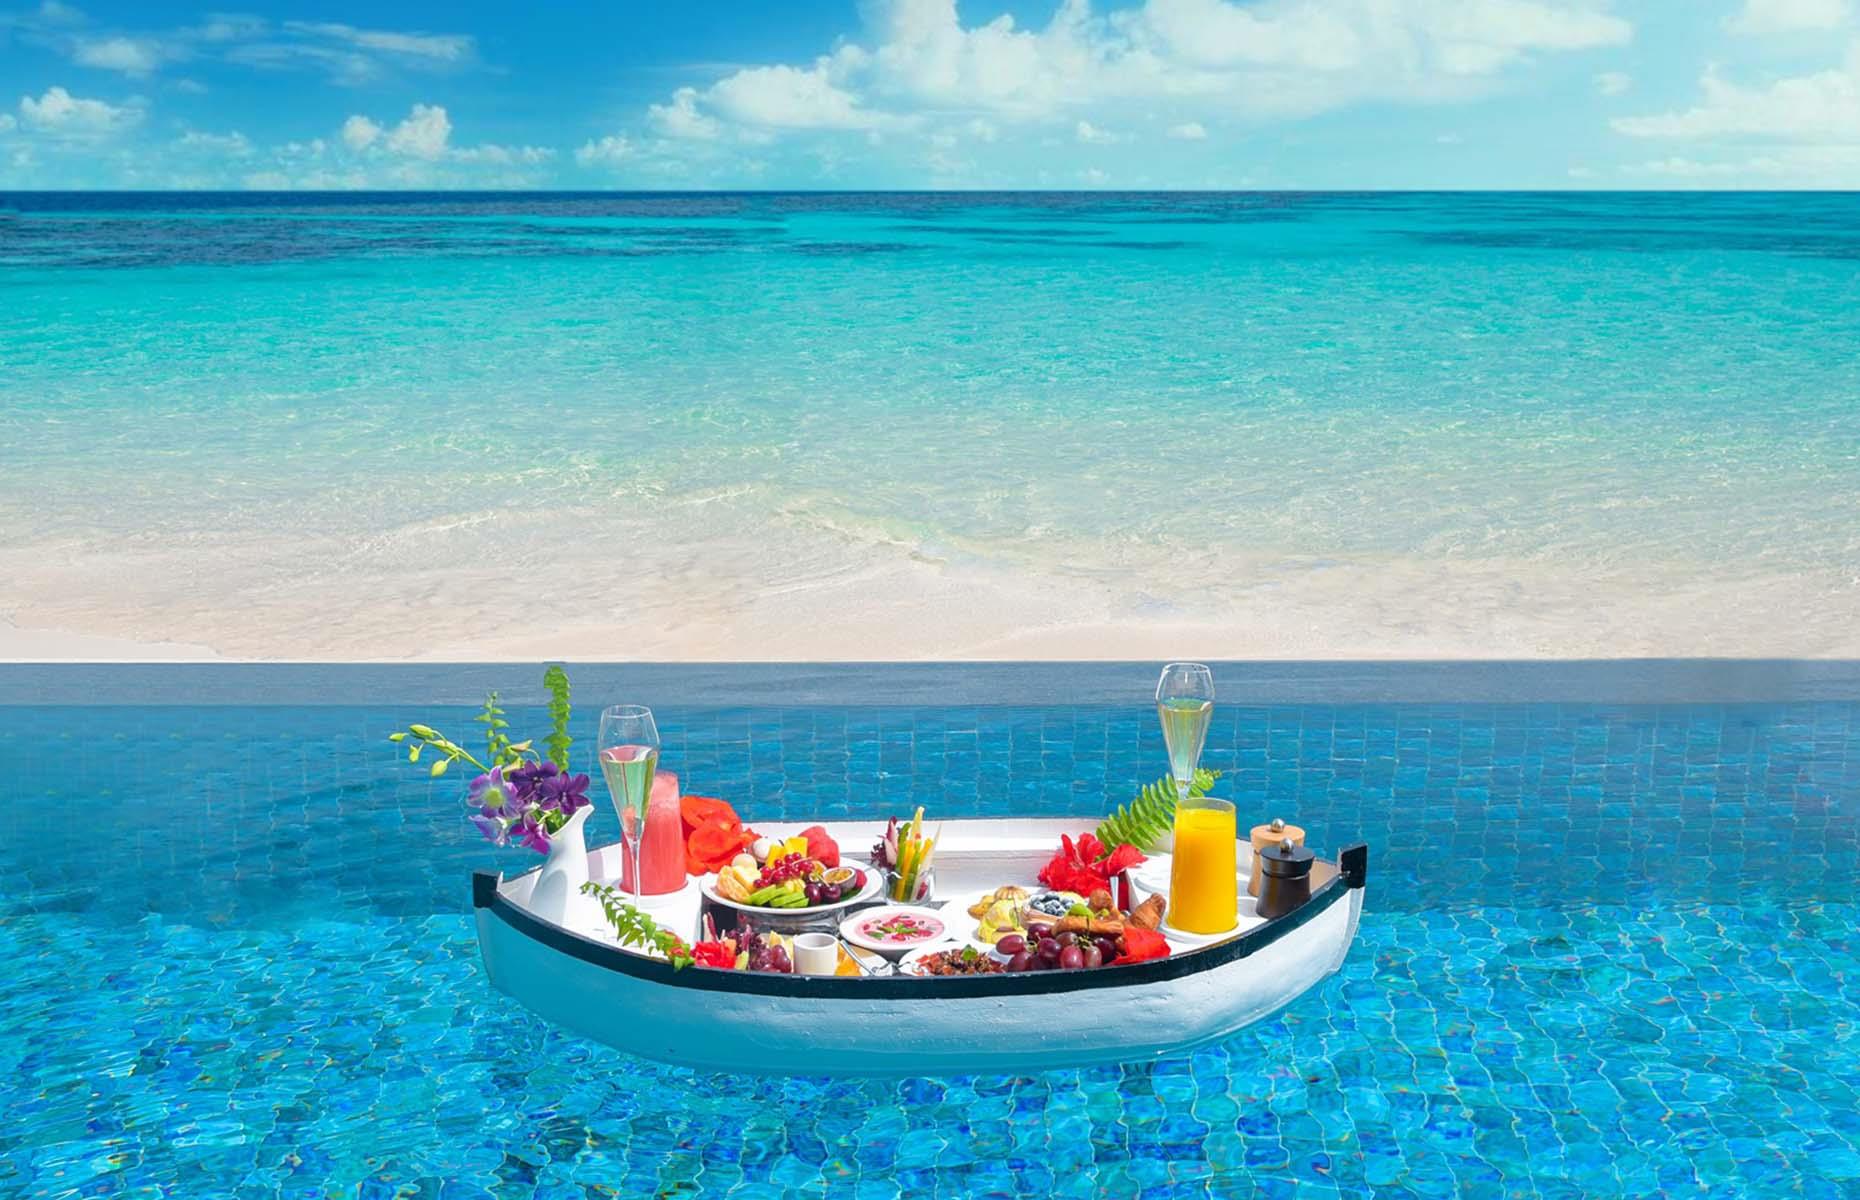 <p>Few of us will be fortunate enough to visit somewhere like <a href="https://www.marriott.co.uk/hotels/travel/mlexr-the-st-regis-maldives-vommuli-resort/">The St. Regis Maldives Vommuli Resort</a> in our lifetime, with its private lagoon, butler service, Ayurvedic spa and overwater villas. But dreaming is free, so let’s pretend for a moment. Breakfast (which is also free for paying guests) is presented at the resort’s signature poolside restaurant Alba. Its elevated takes on traditional favorites include poached egg with orange hollandaise and black truffle and a lobster omelet with crab and caviar. You can even opt for a floating breakfast, complete with tropical fruits and bubbly.</p>